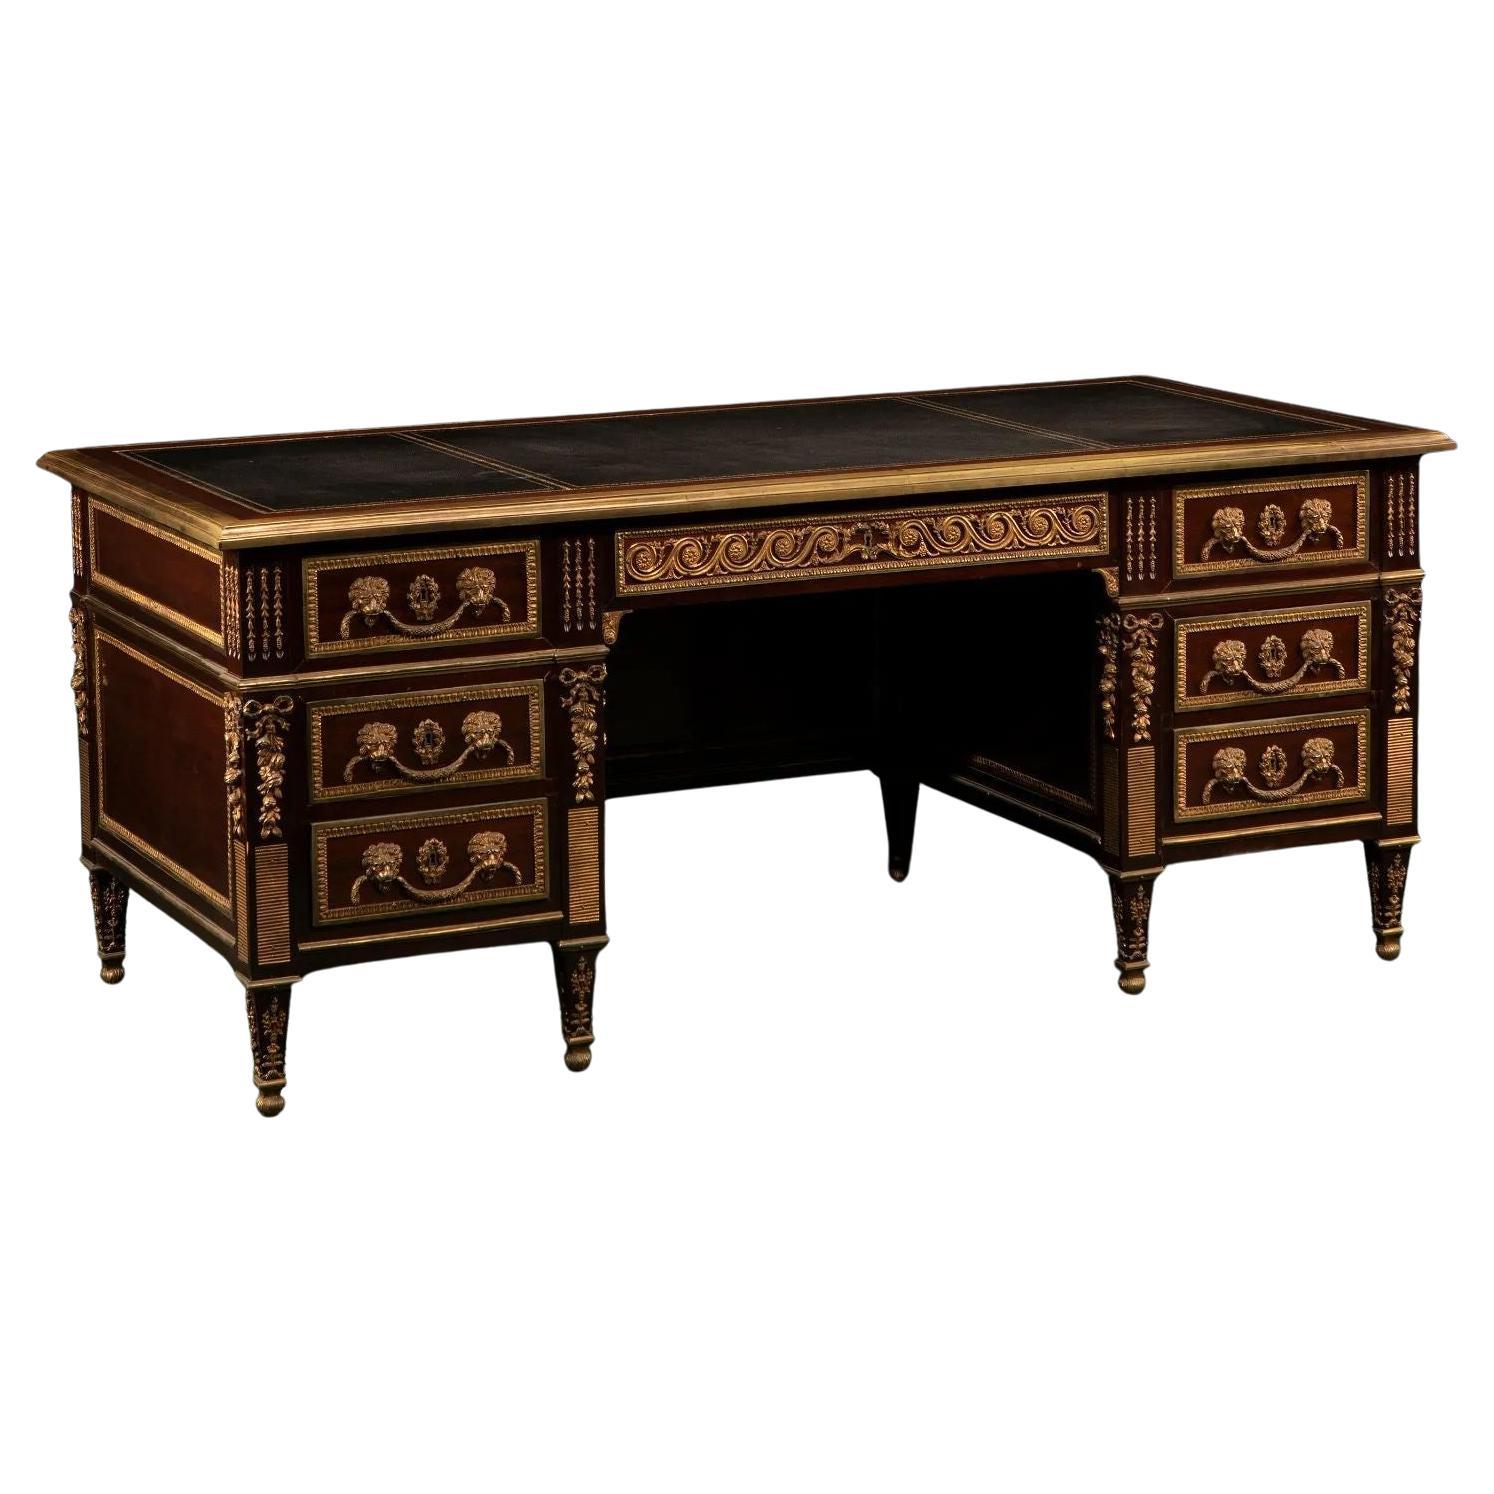 Mid-20th Century French Louis XVI-Style Executive Desk For Sale